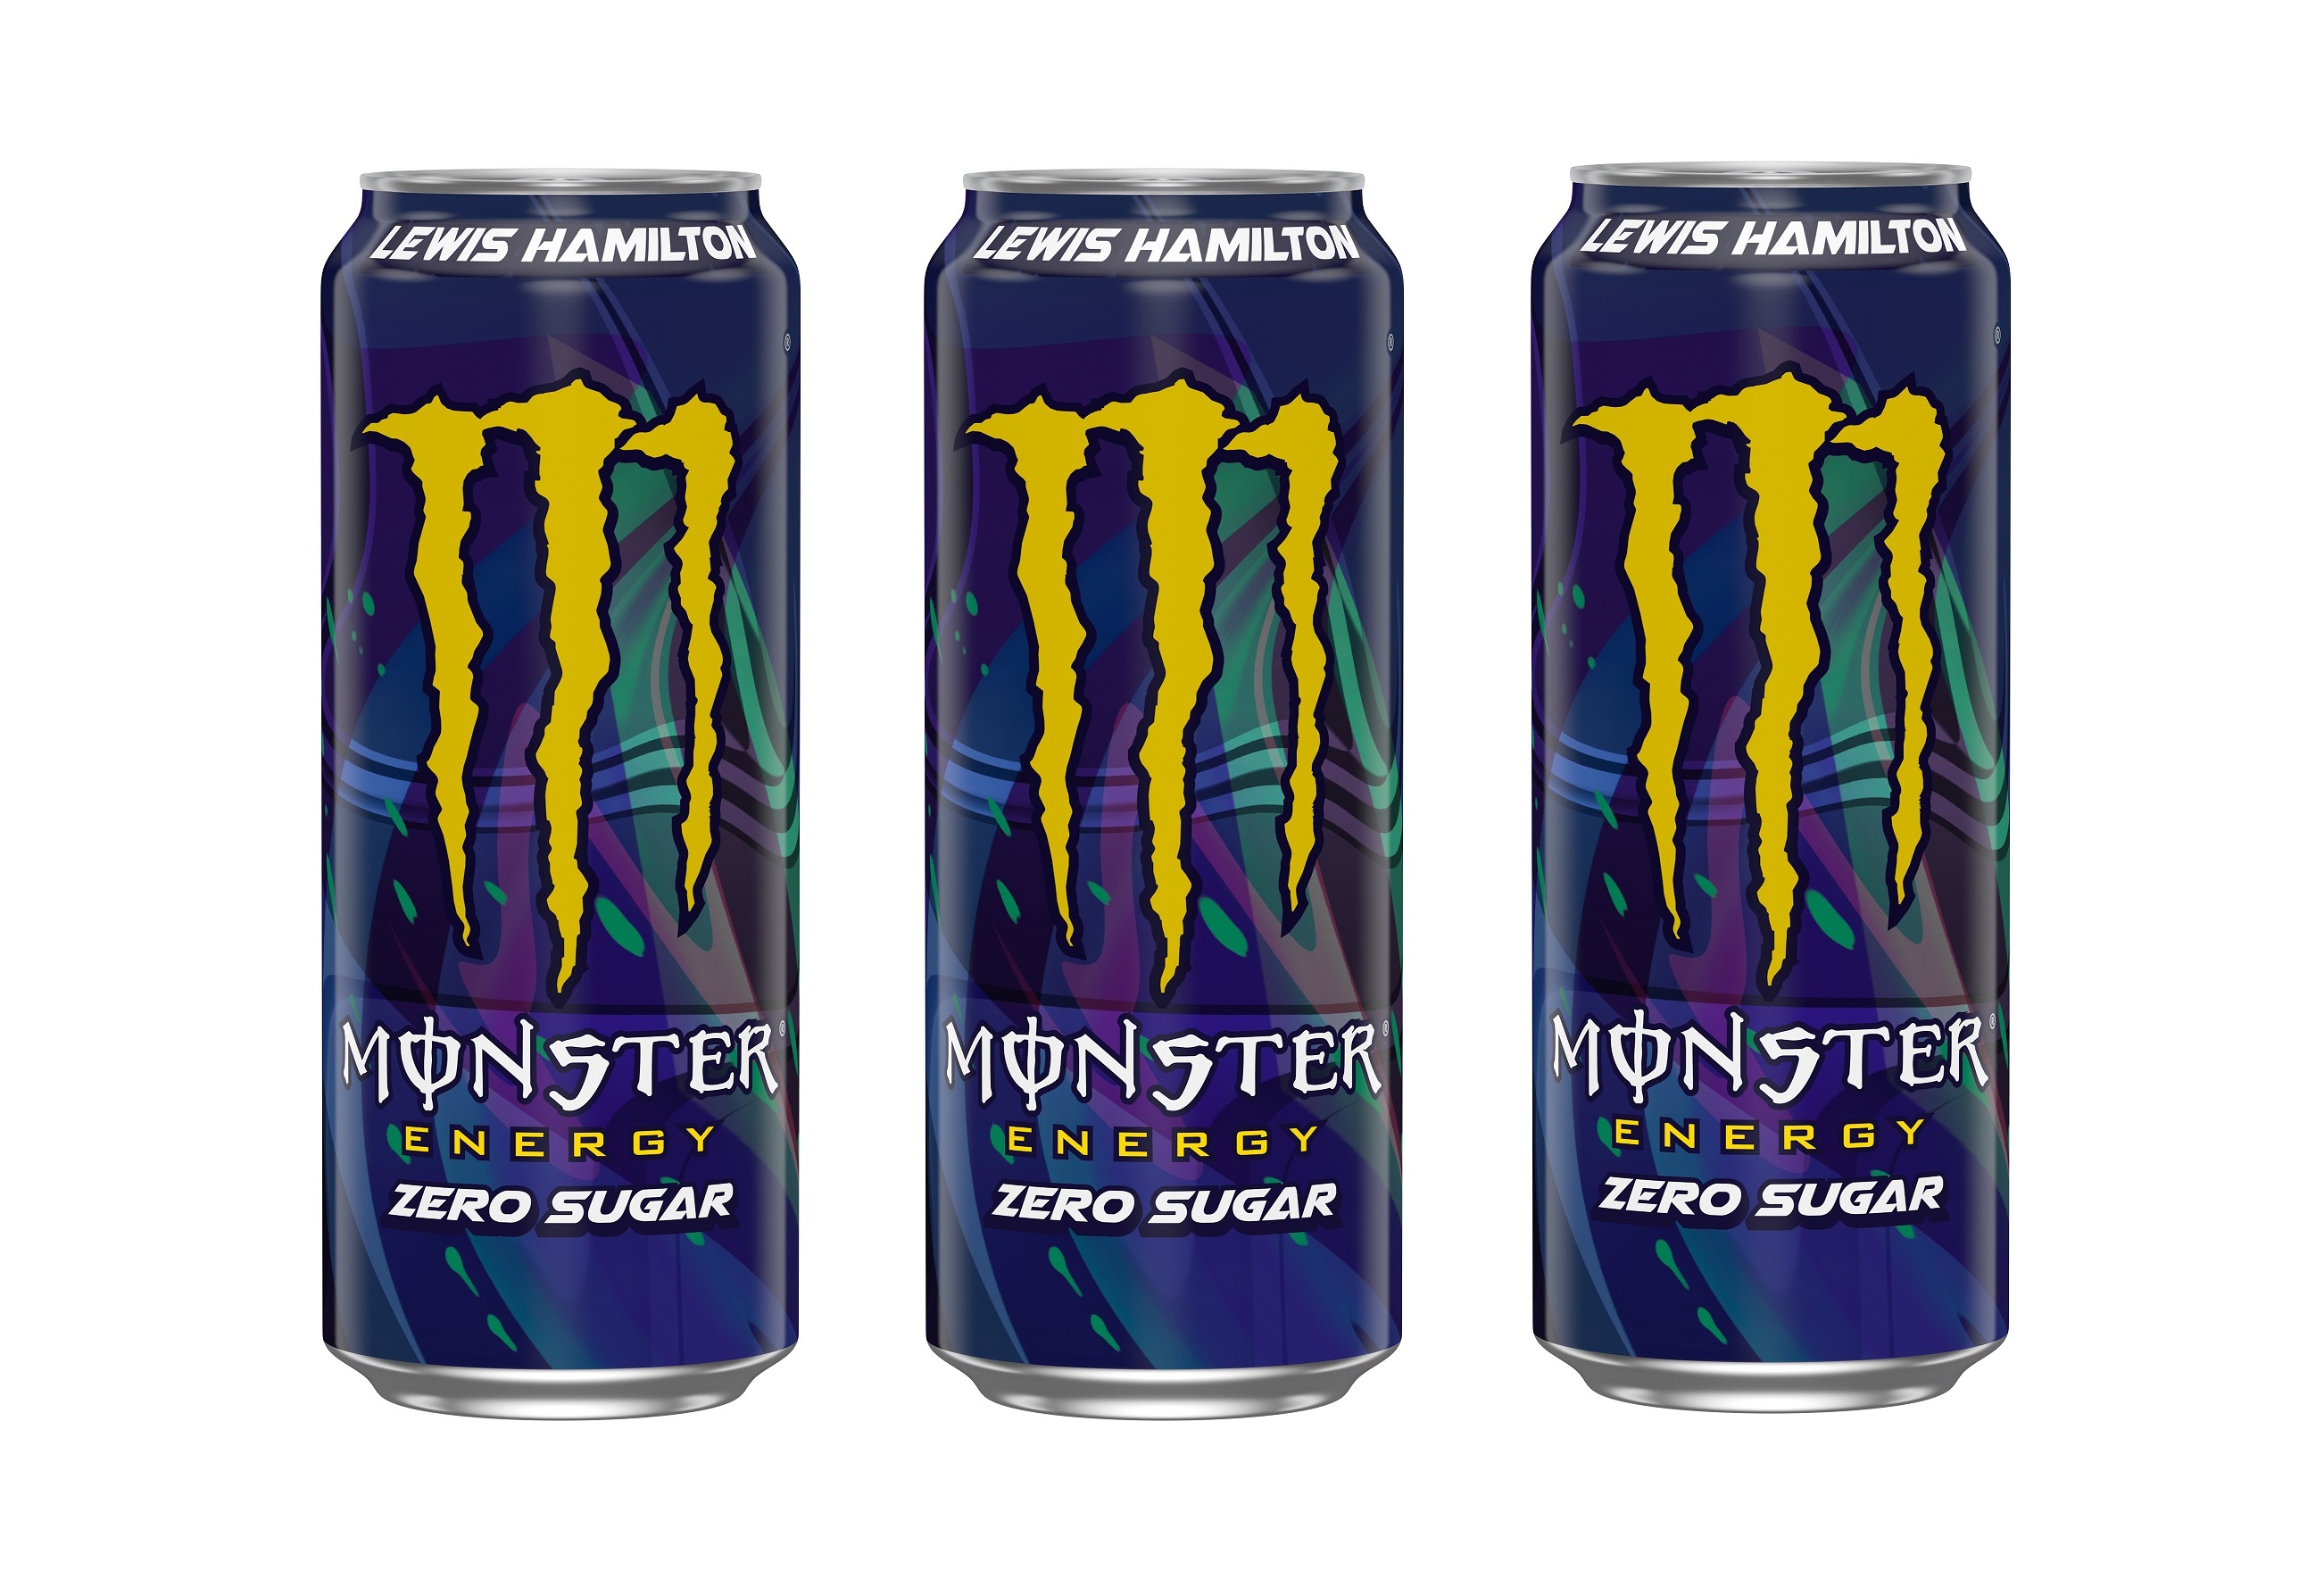 Monster set to unleash Beast on alcohol category